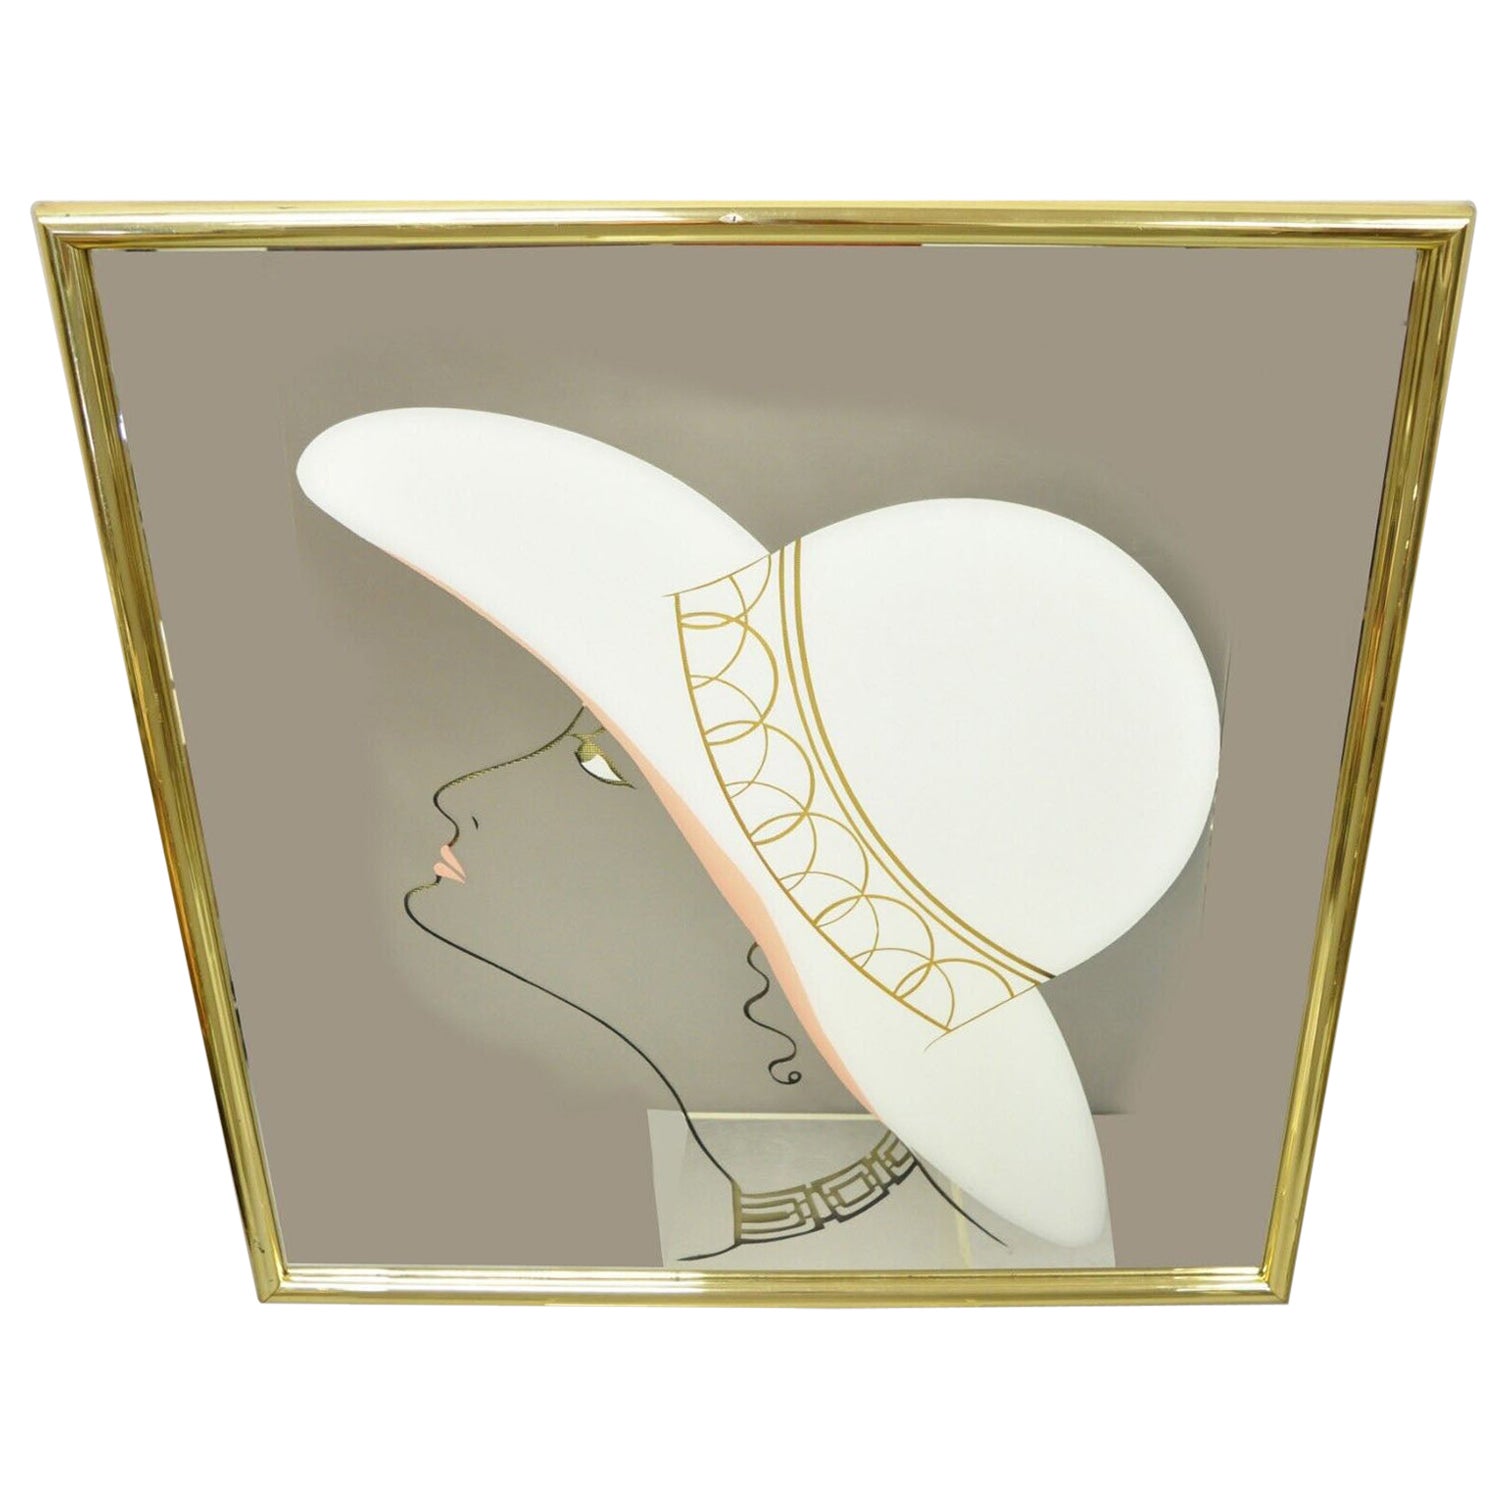 Vintage Art Deco Style Square Wall Mirror with Woman in Hat Art For Sale